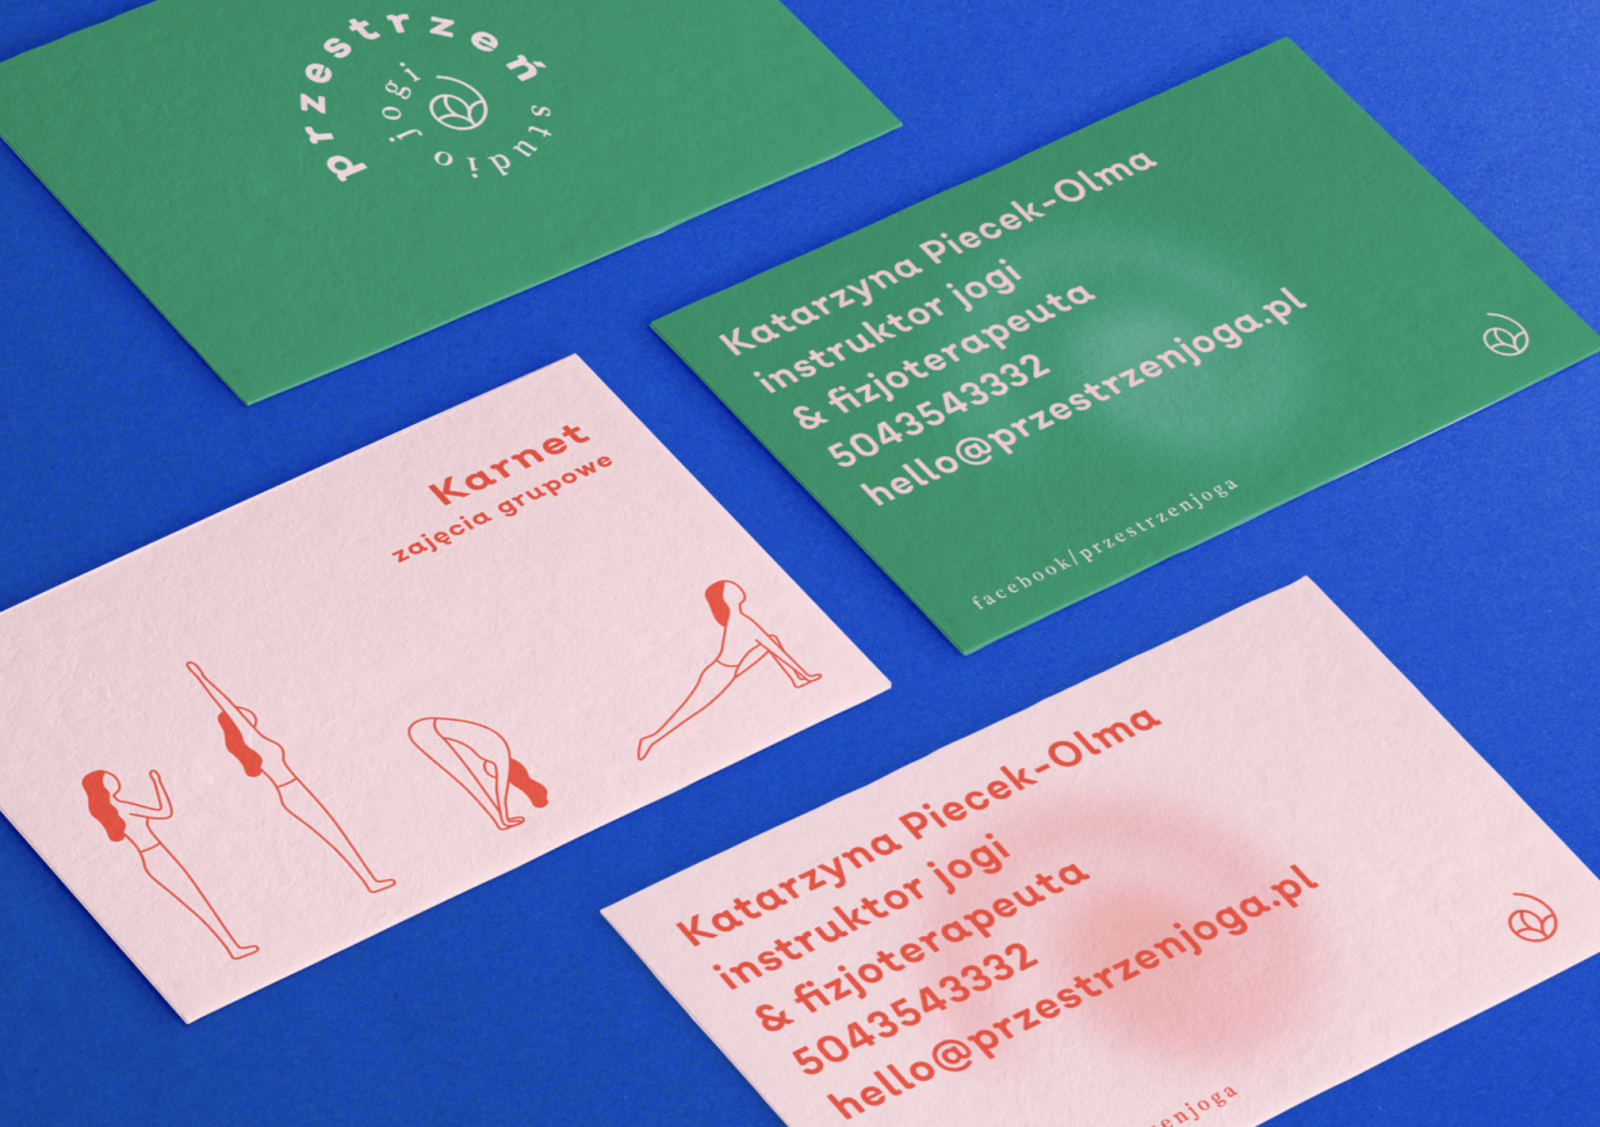 10 Yoga Studio Branding Concepts to Help You Feel Relaxed & Mindful